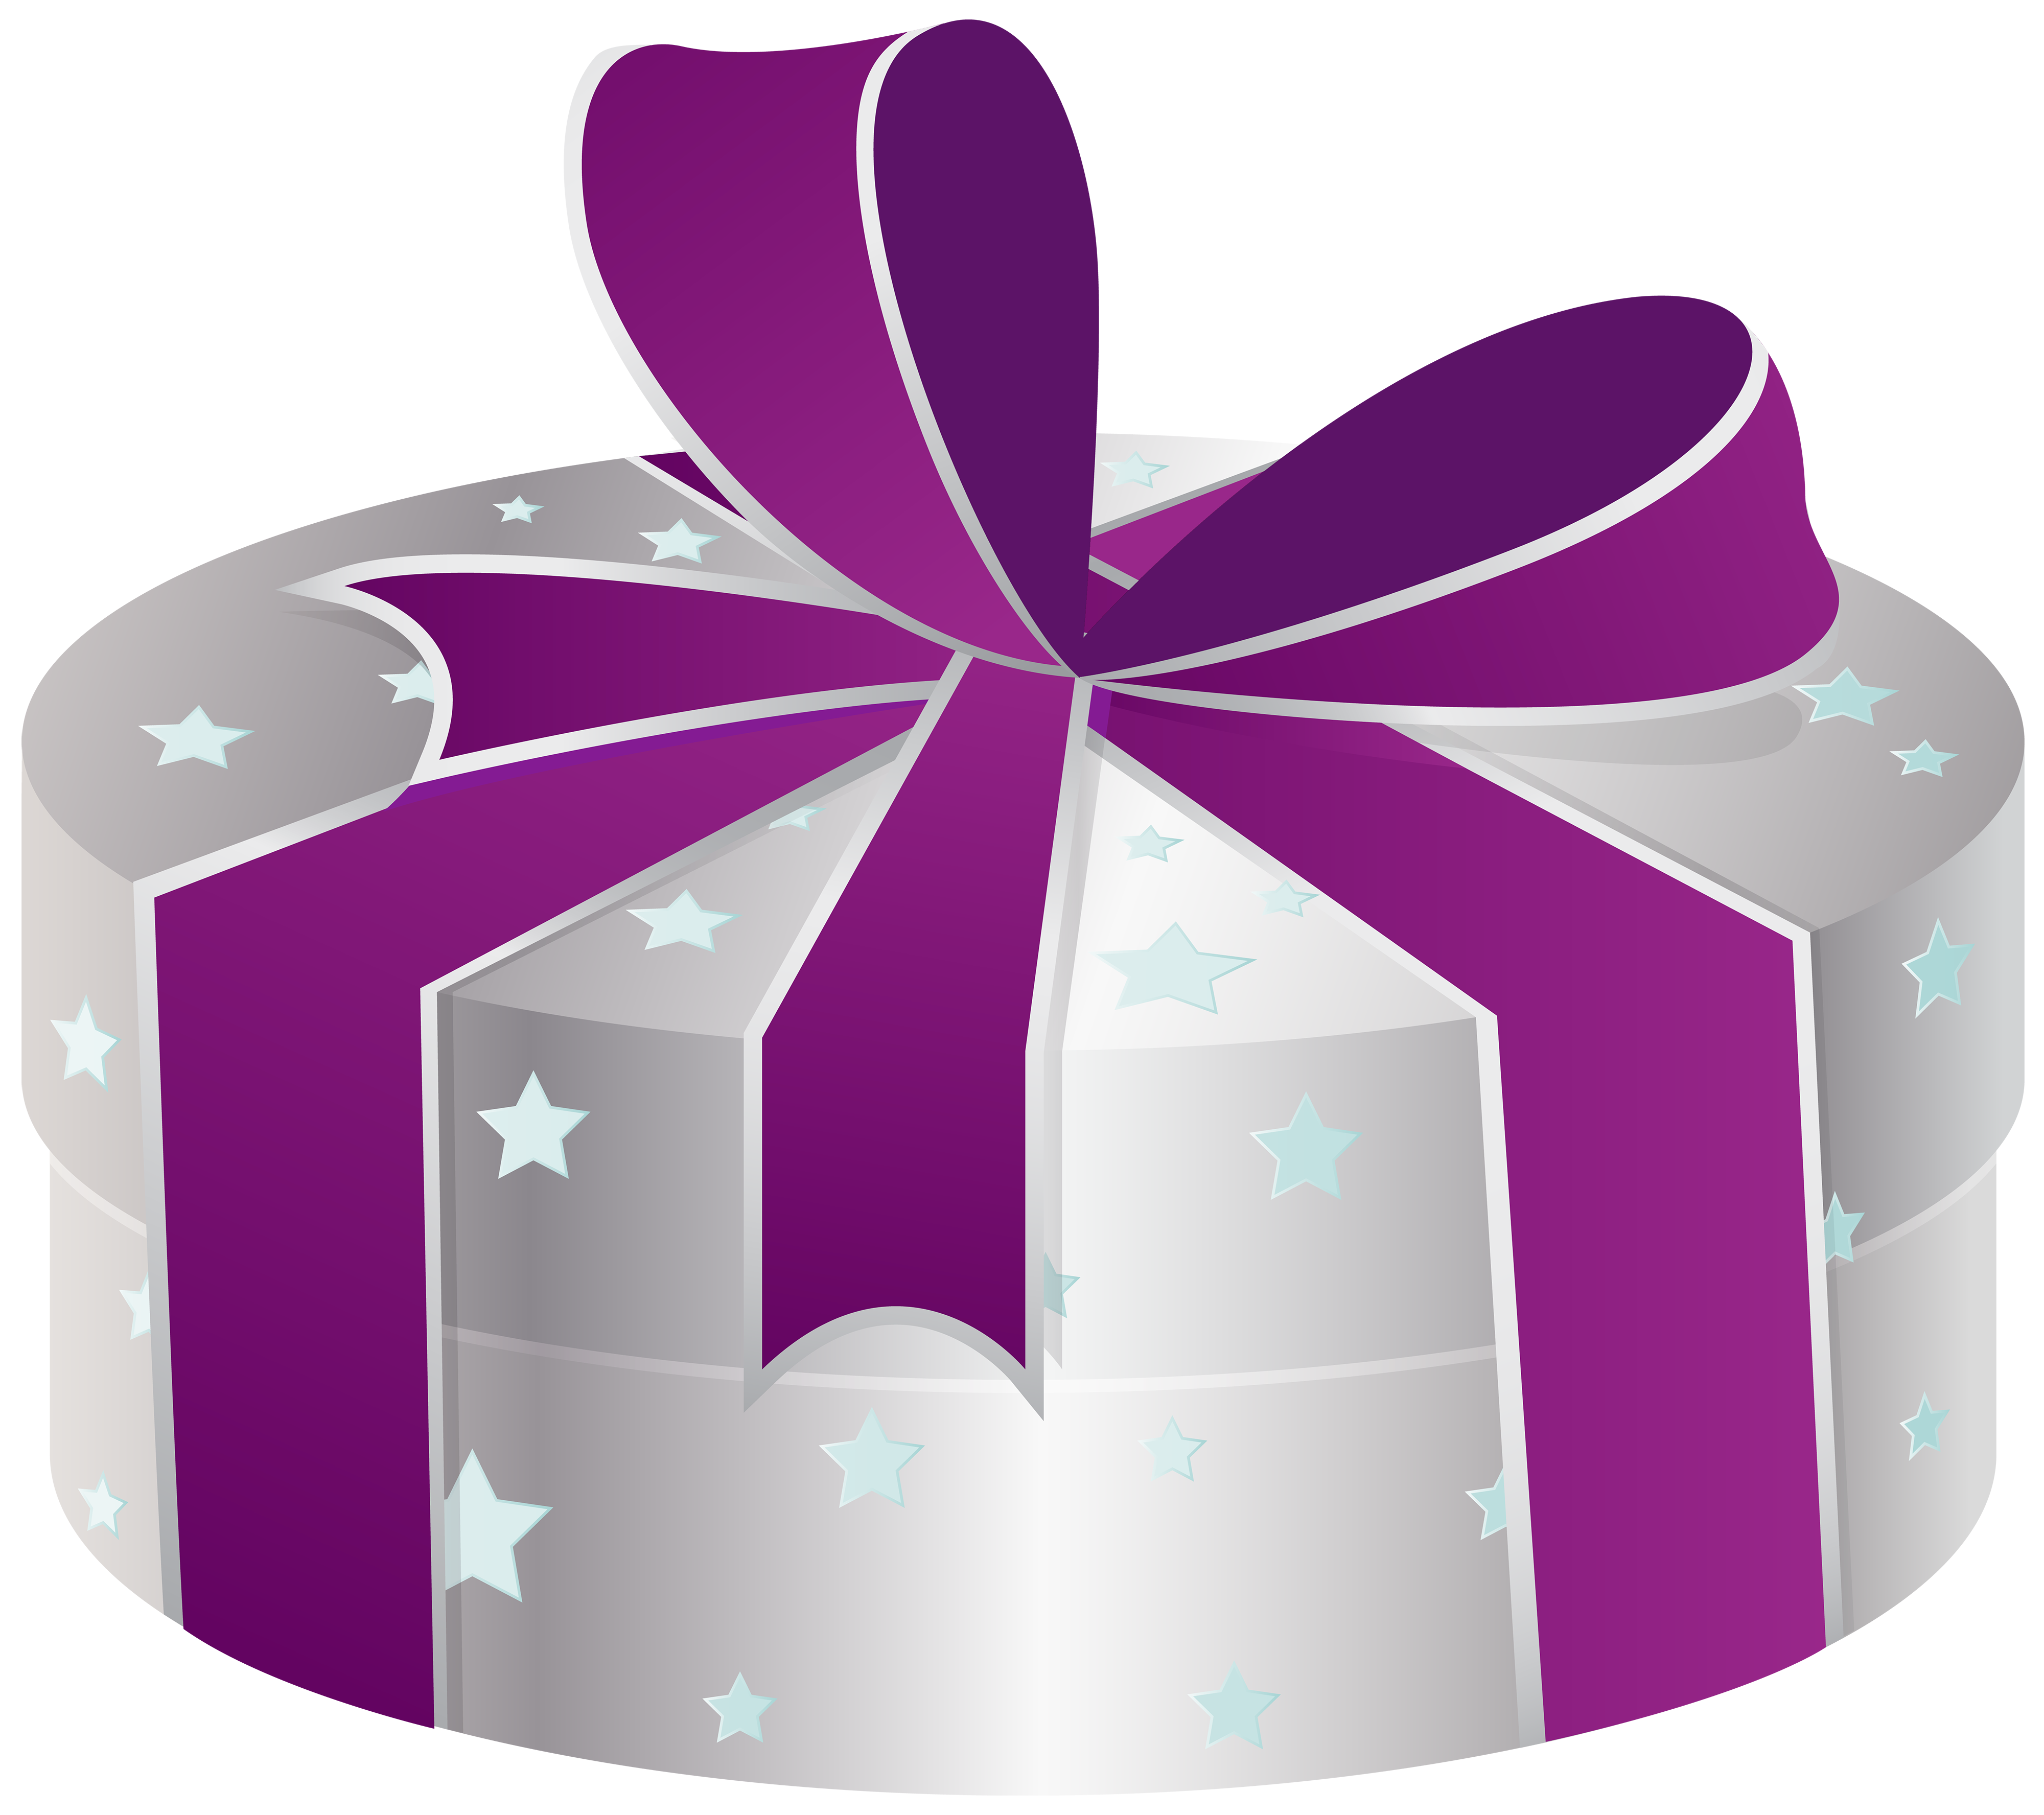 Padlock clipart violet. Silver gift box with